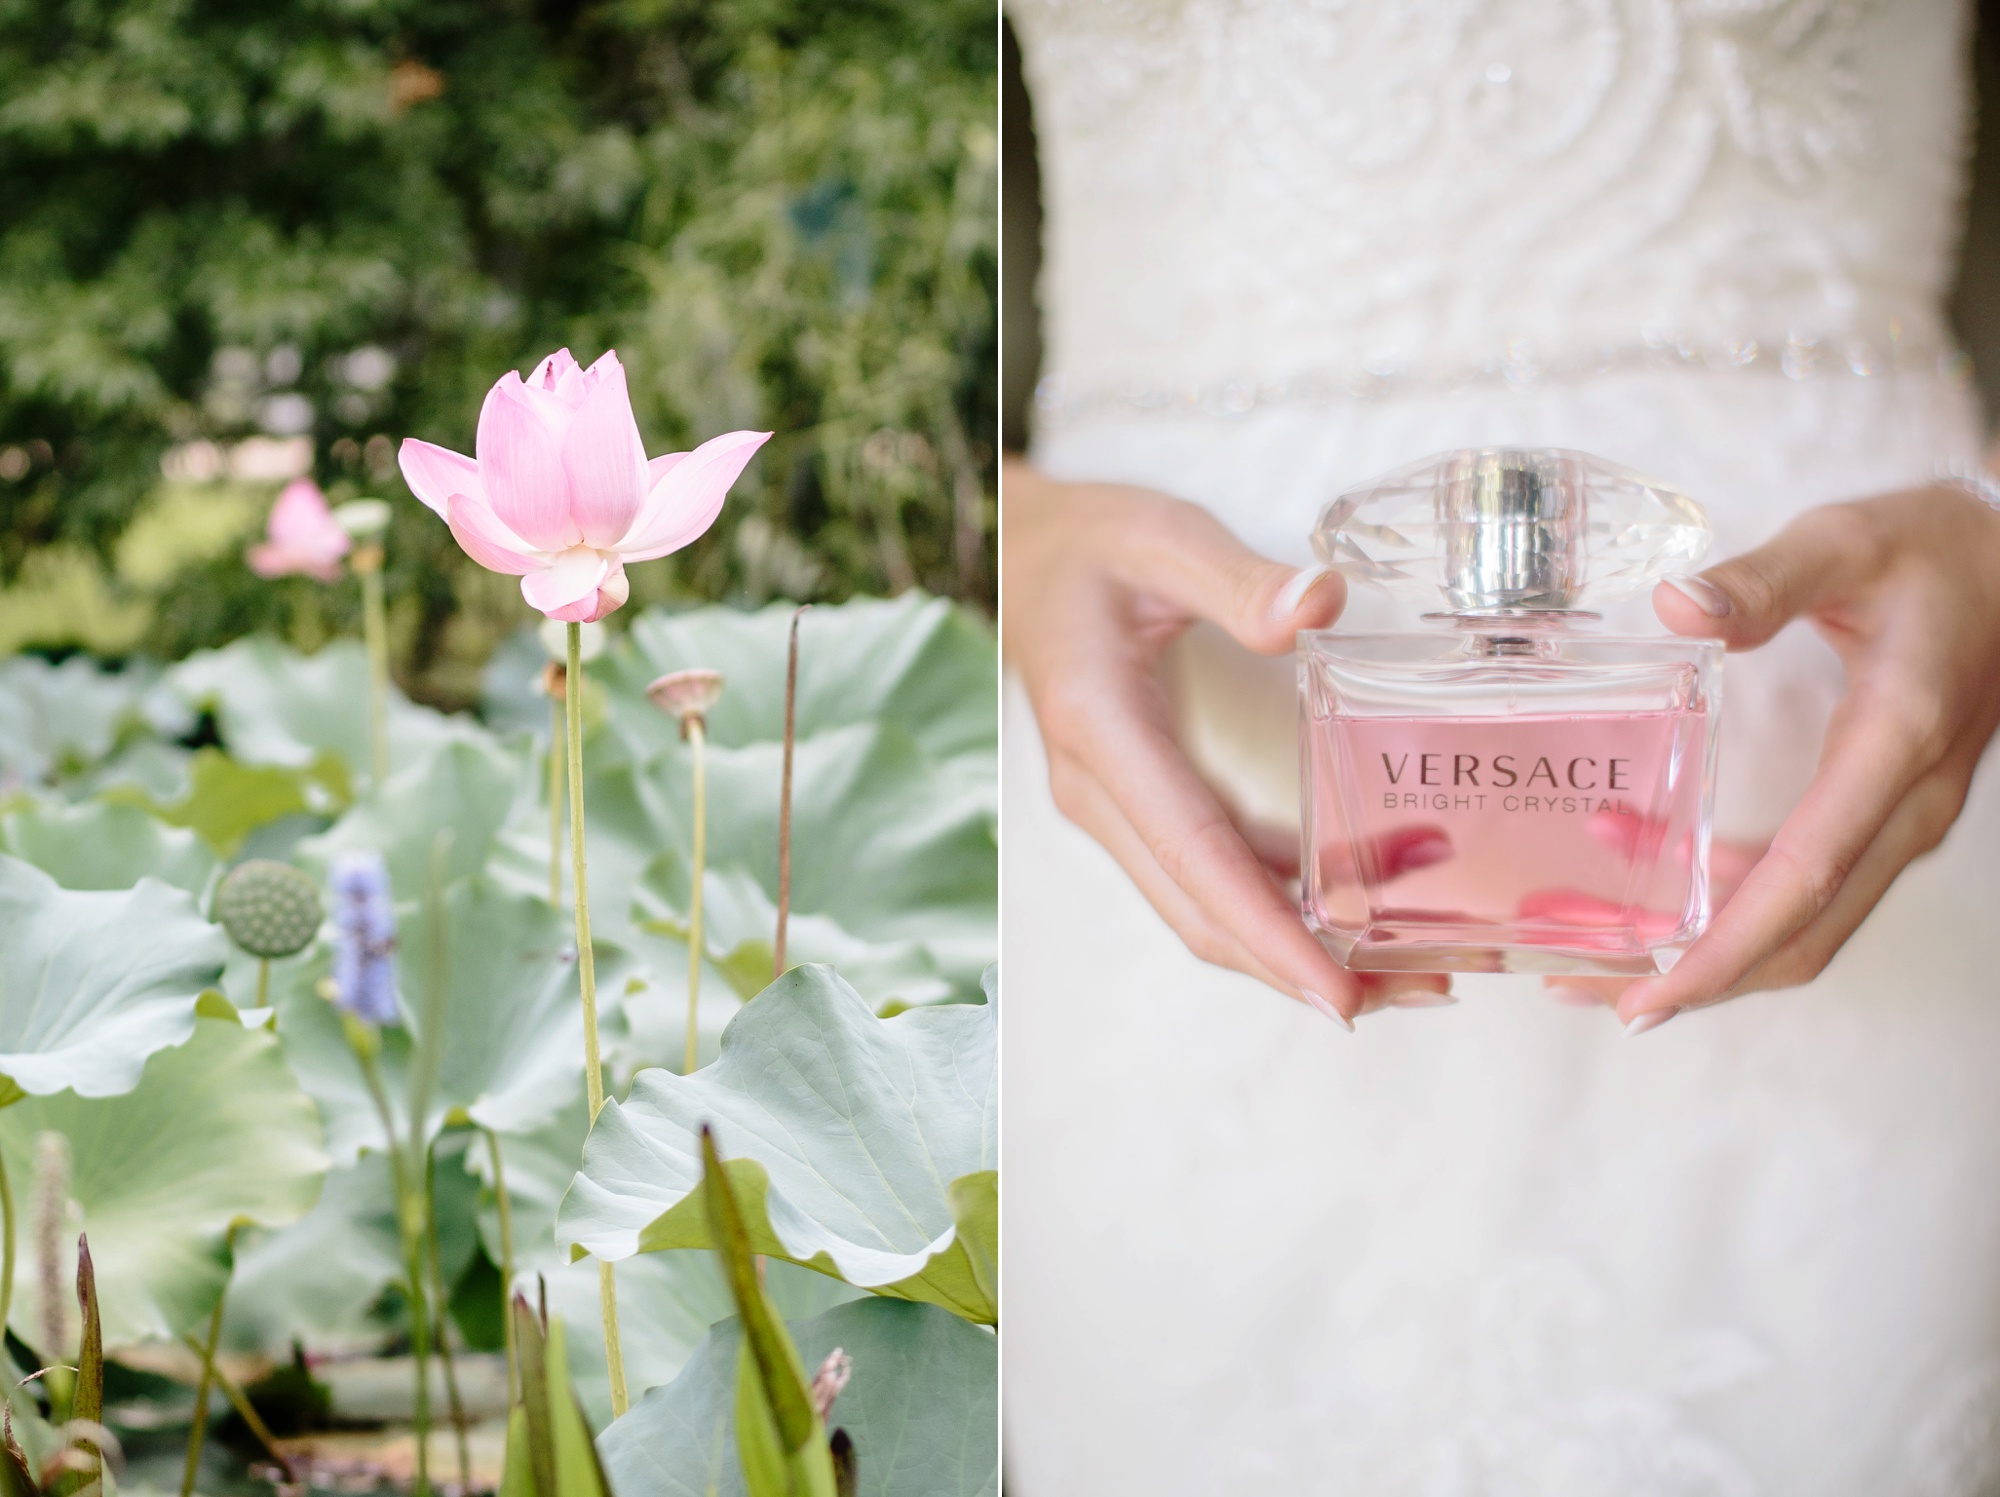 This bride chose Versace bright crystal as her wedding day perfume and I love how the pink color plays with the florals in bloom at the property on Foxhall. Photos by Rebecca Cerasani, Foxhall's premier wedding photographer.